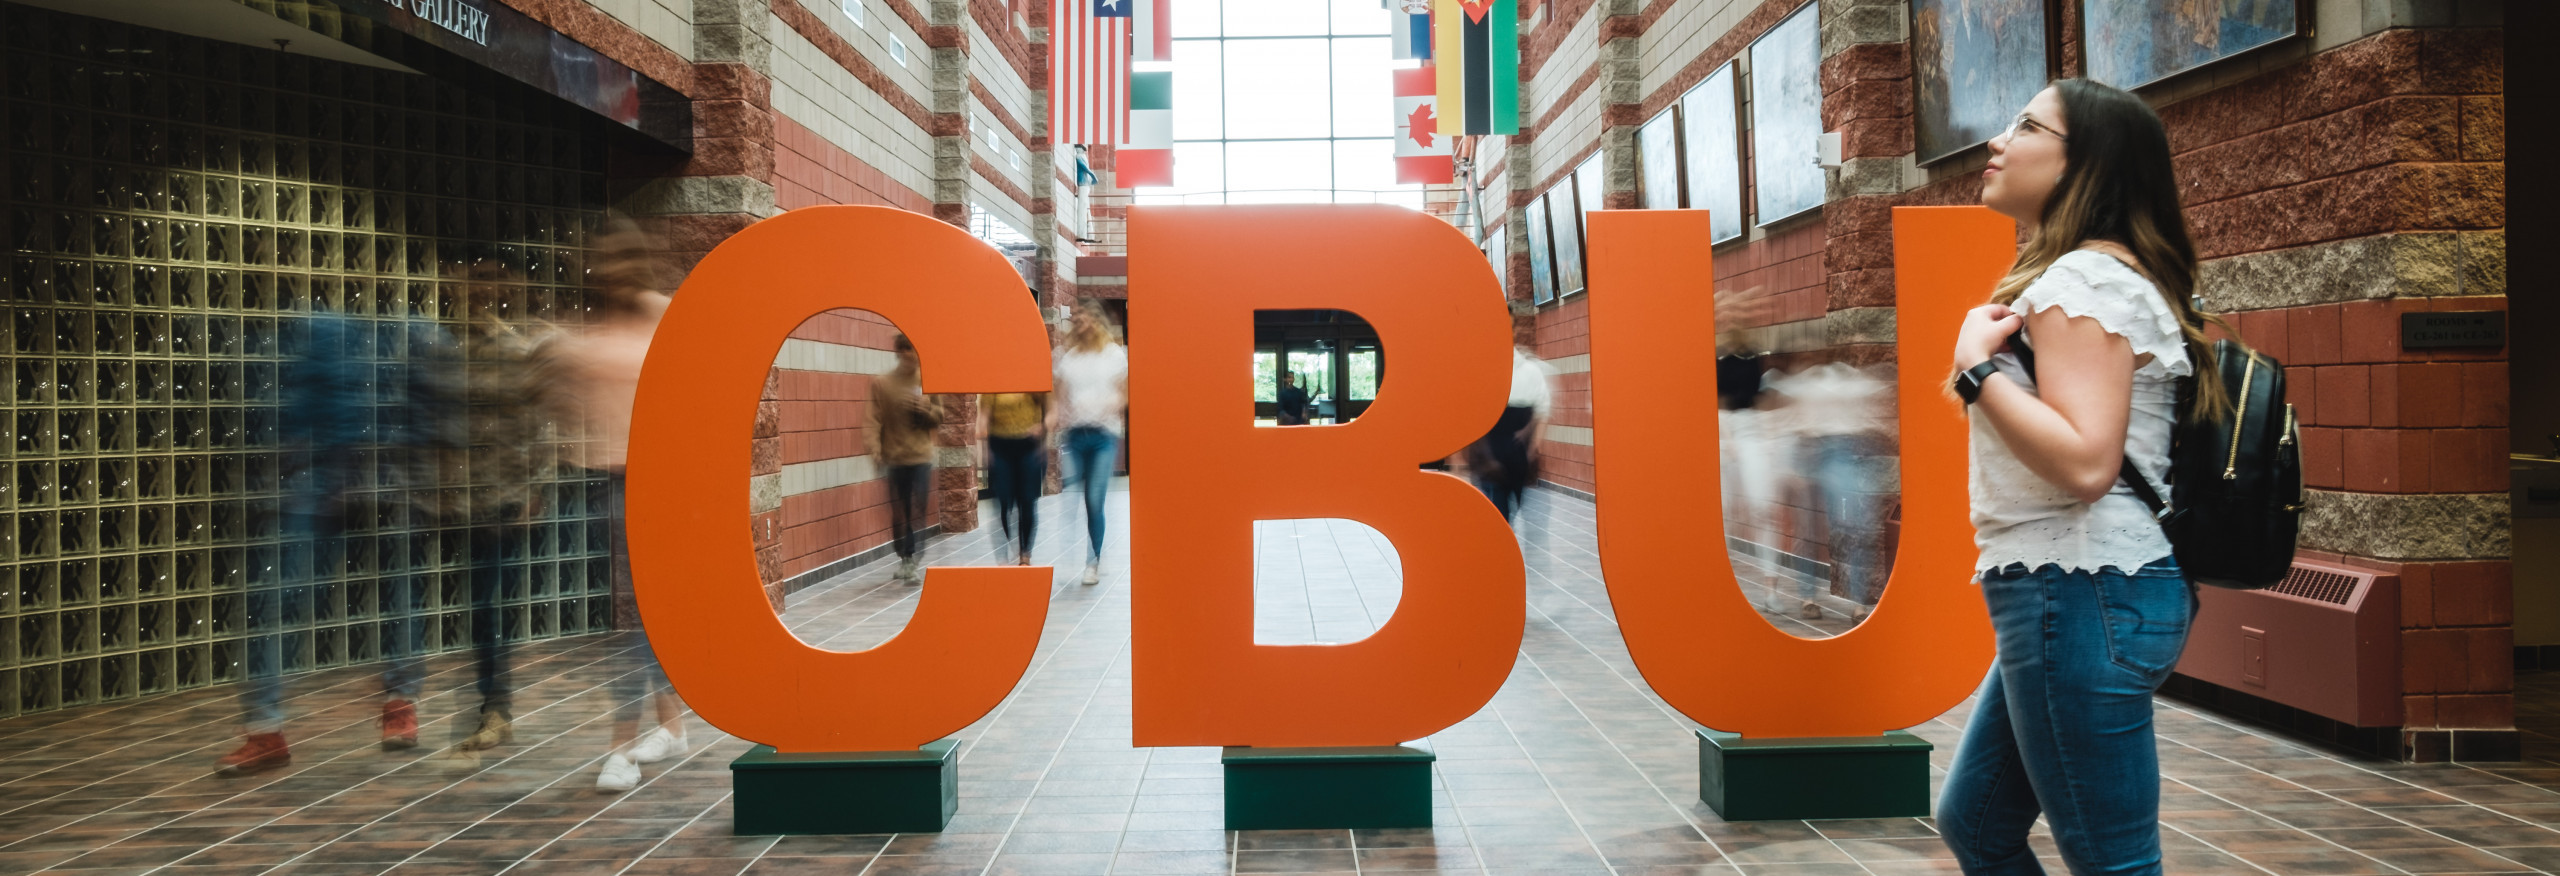 CBU letters great hall